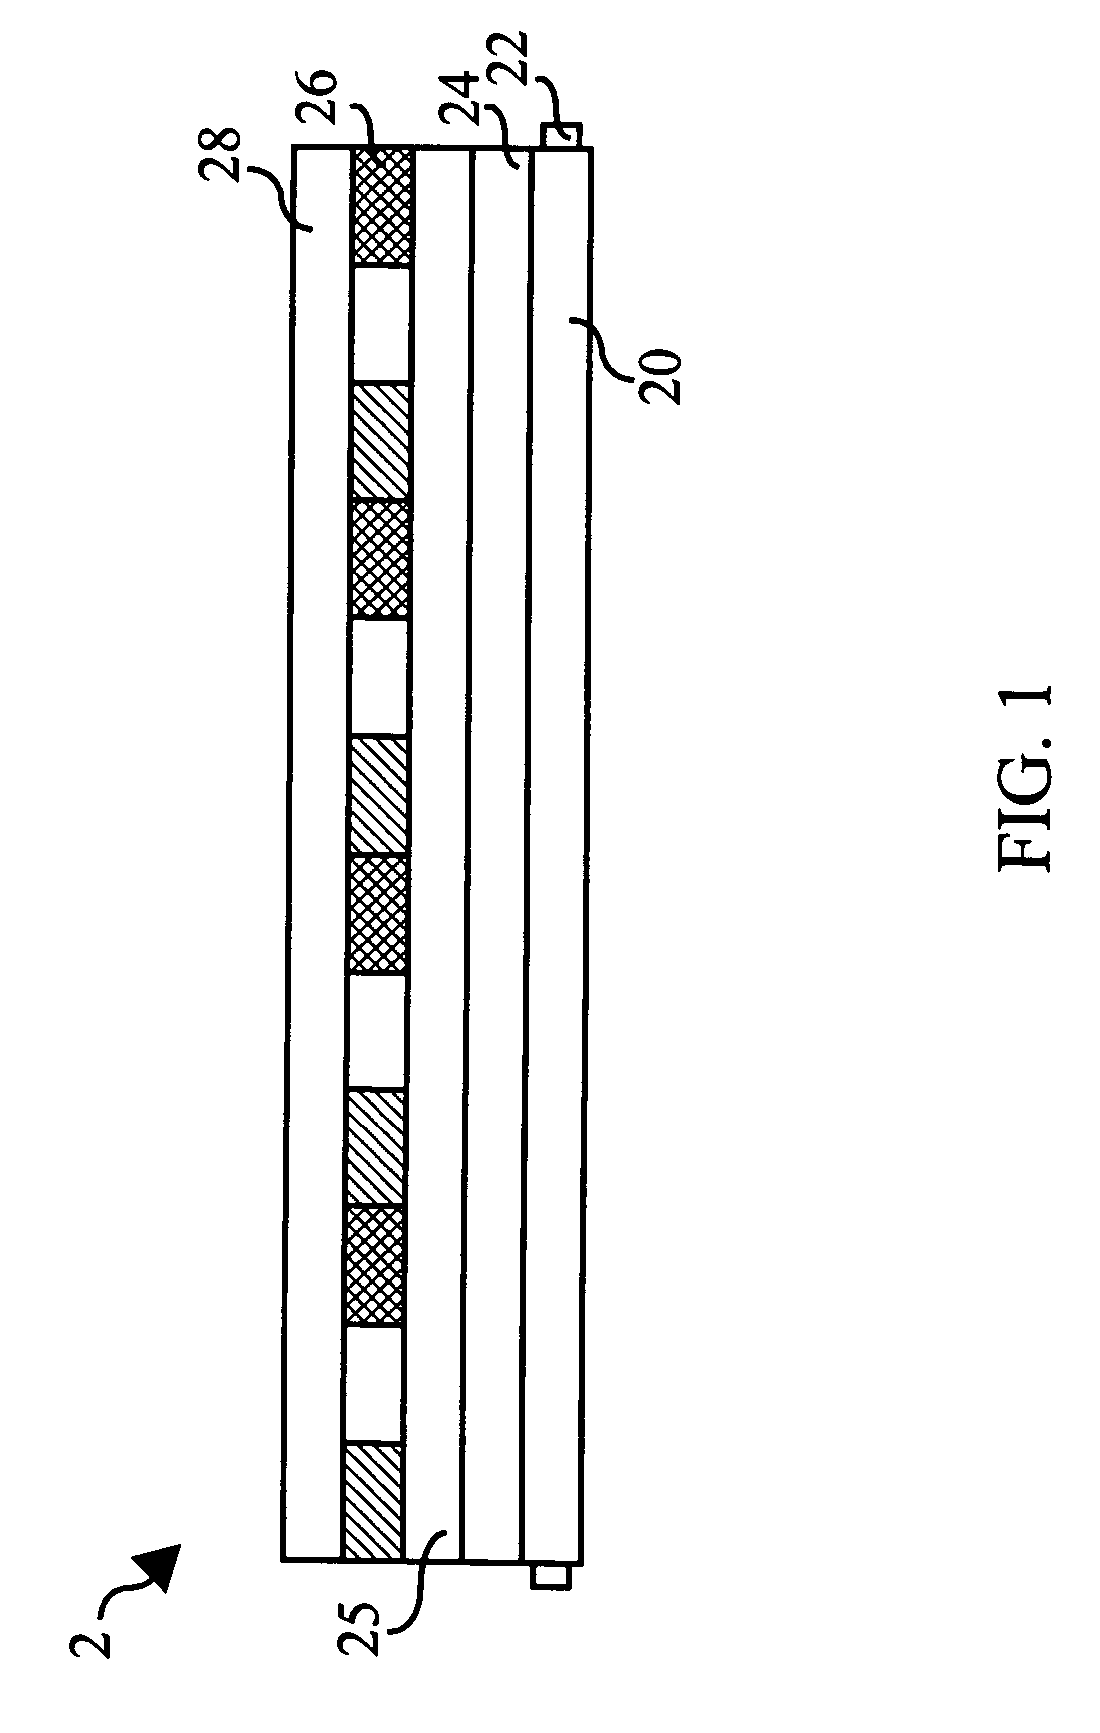 Display module using blue-ray or ultraviolet-ray light sources